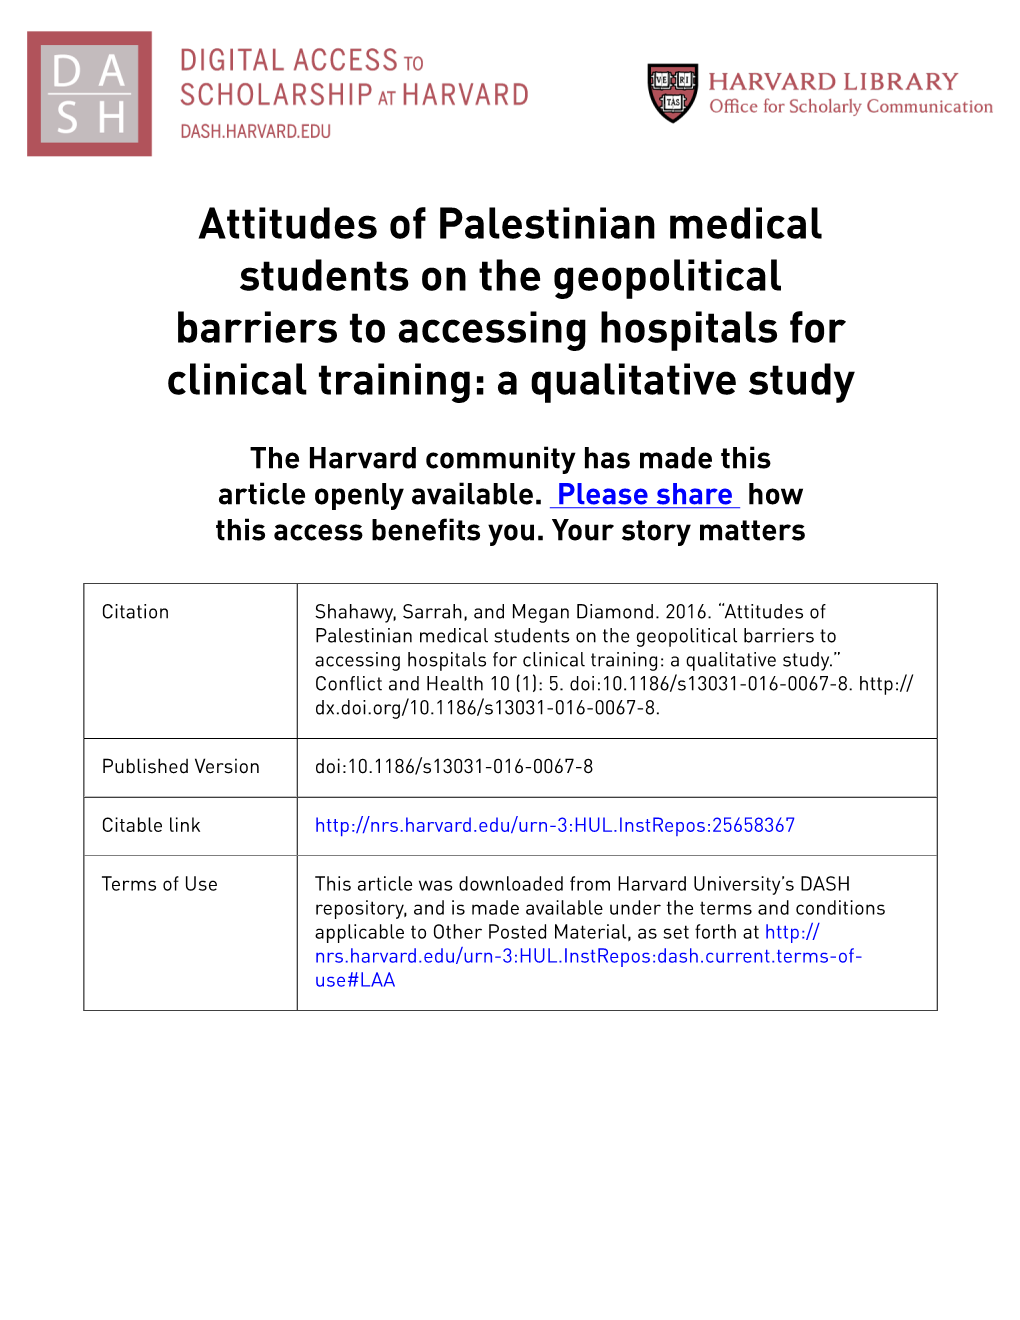 Attitudes of Palestinian Medical Students on the Geopolitical Barriers to Accessing Hospitals for Clinical Training: a Qualitative Study